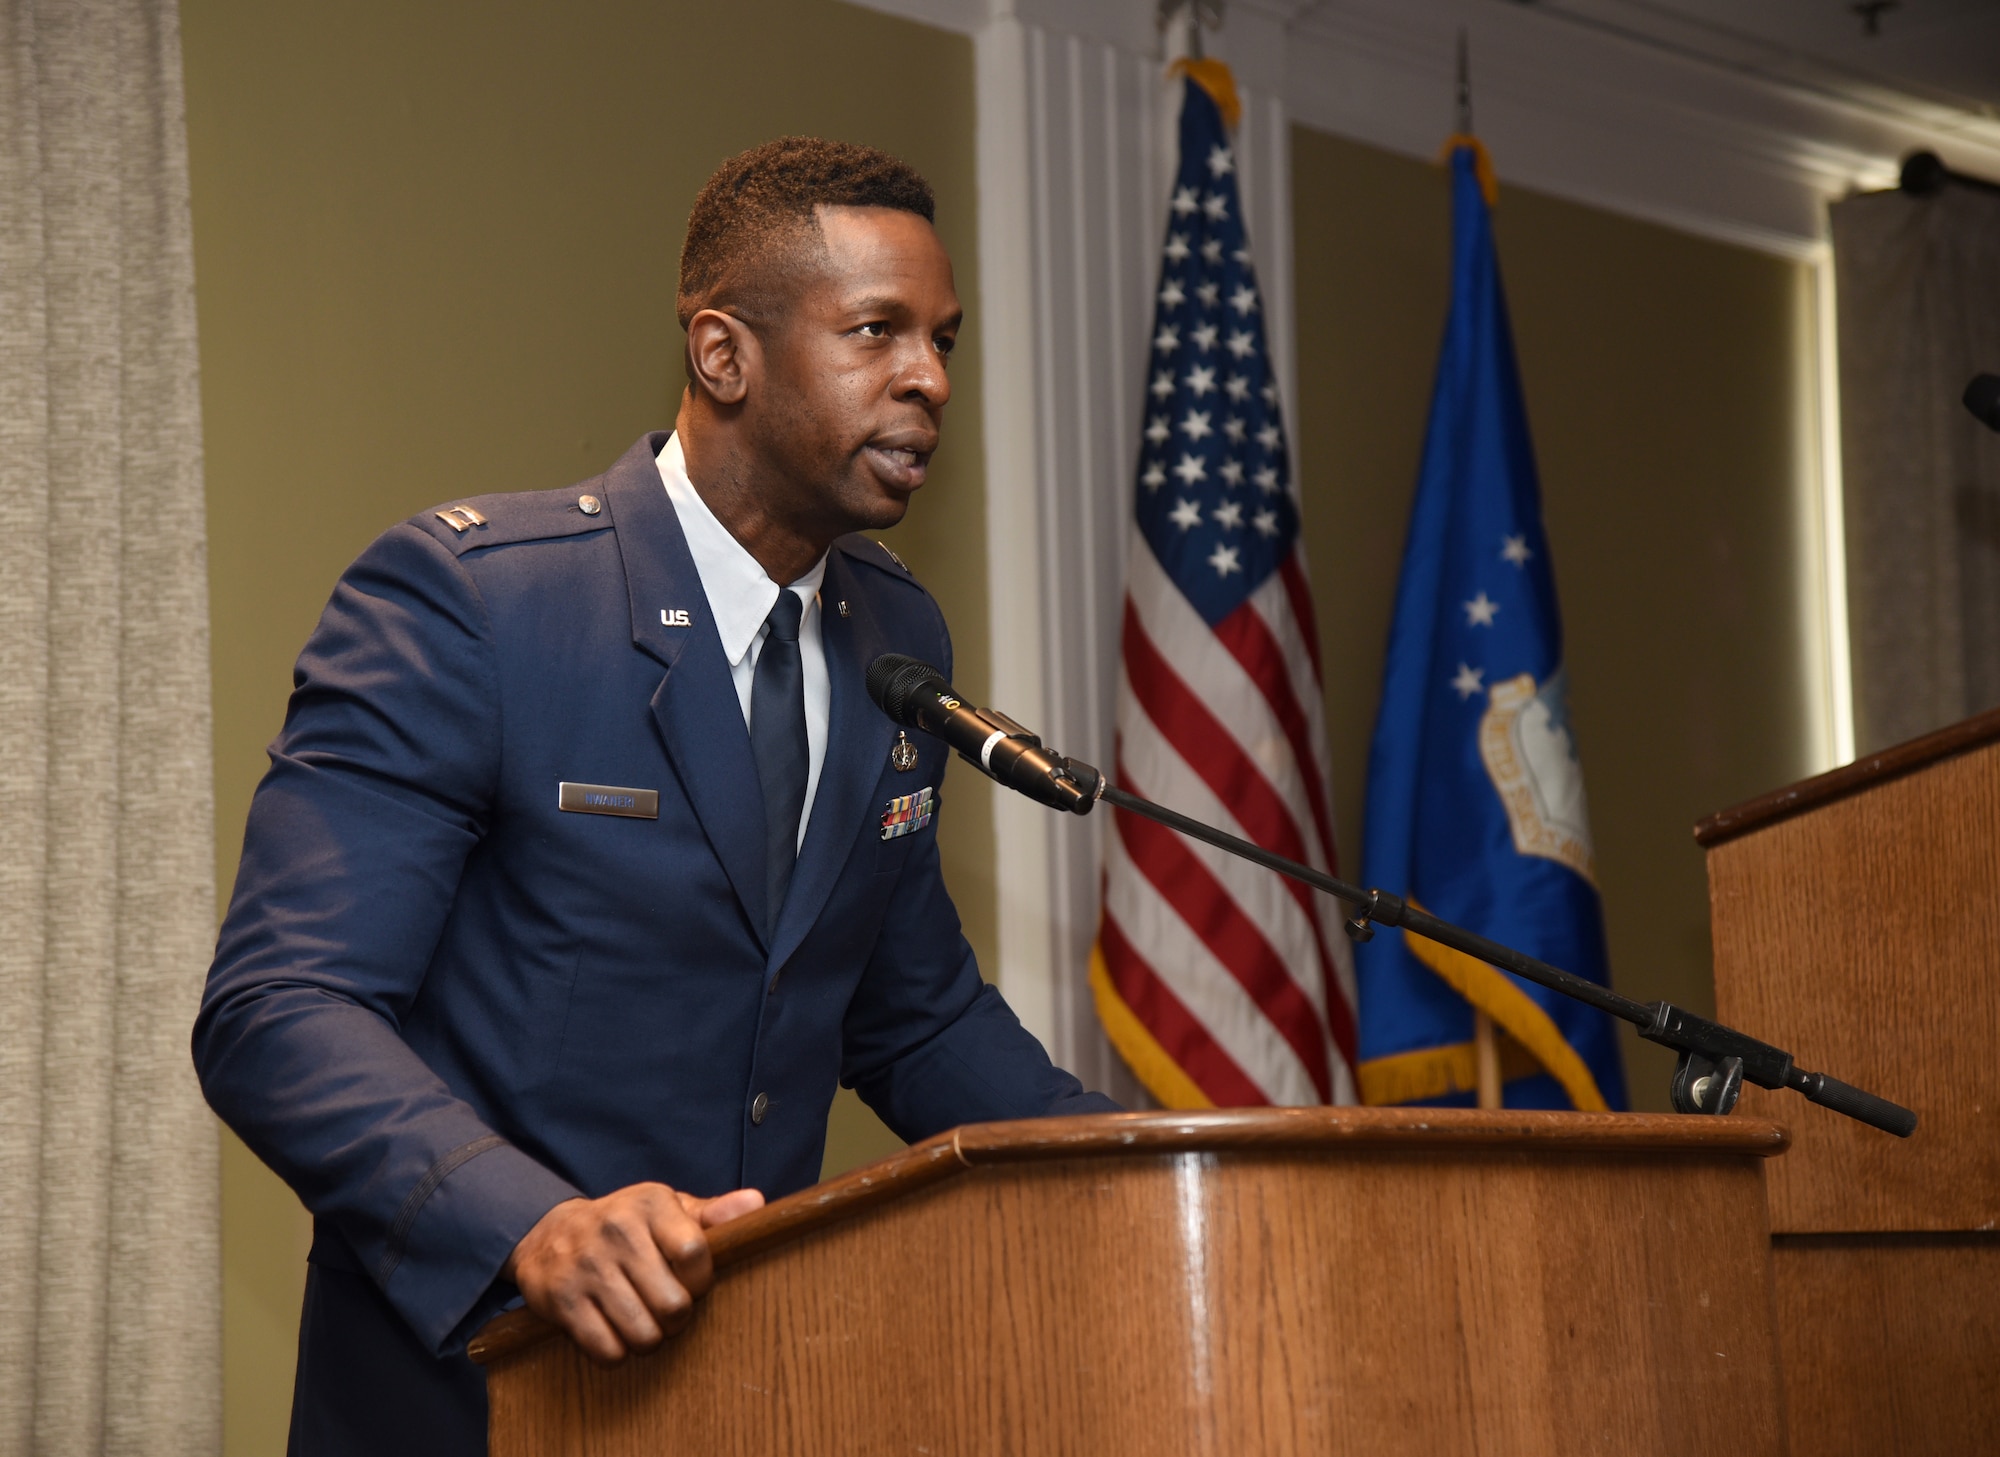 Chaplain (Capt.) Okechukwu Nwaneri gave the invocation at the Black History Month Luncheon Feb. 21. He also presented a donation to the Fifth Street Missionary Baptist Church on behalf of the Tinker African American Heritage Council.